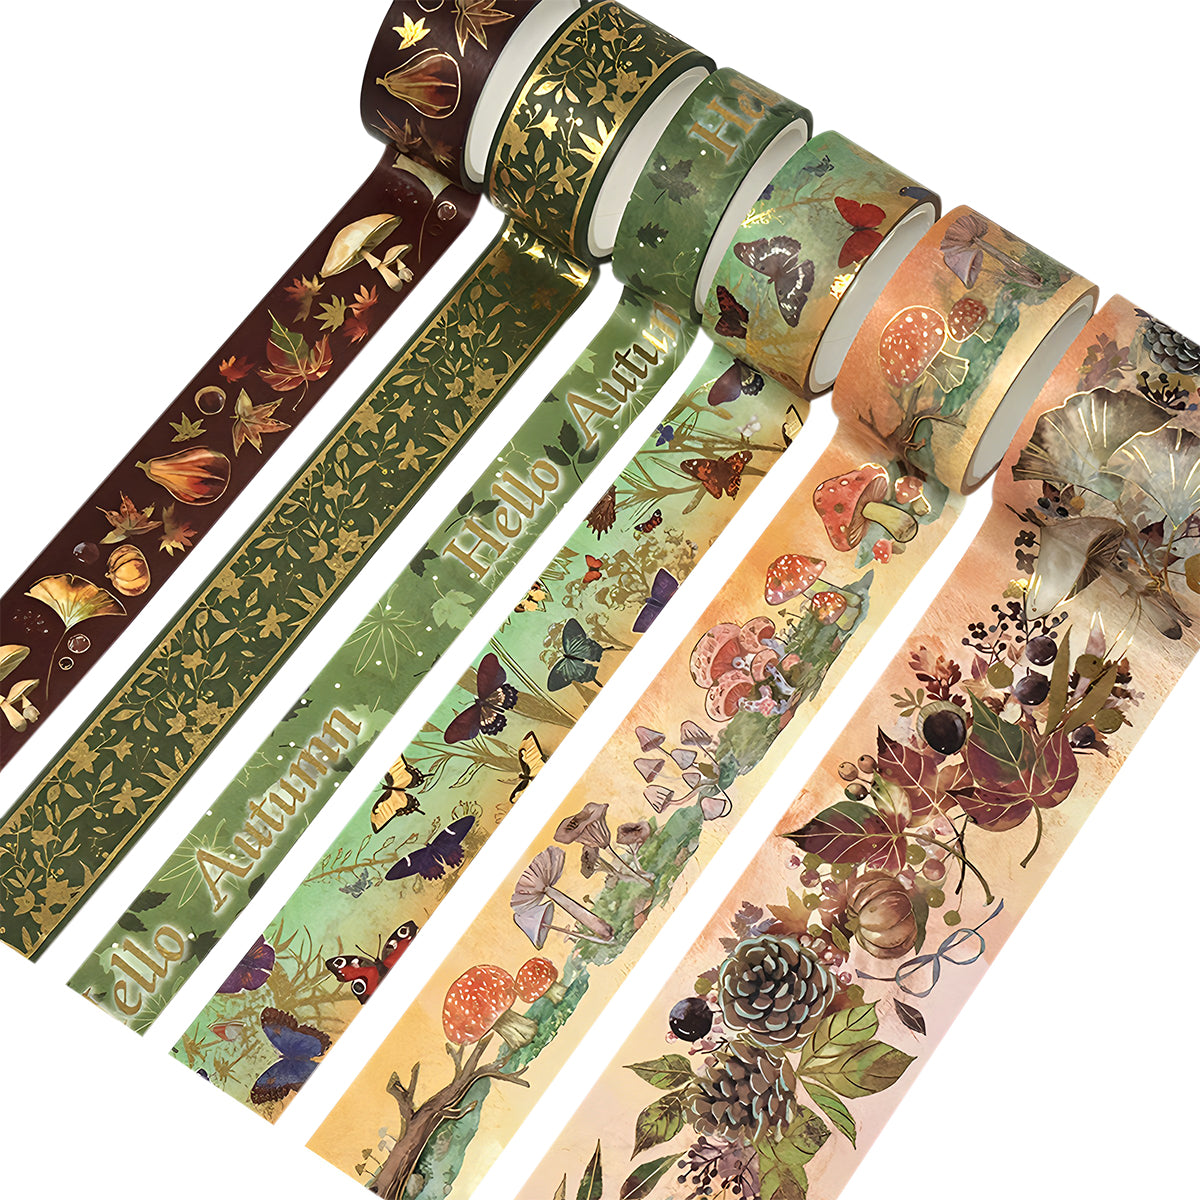 Wrapables Gold Foil Washi Tape in a Box Set for Scrapbooking, Stationery, Diary, Card Making